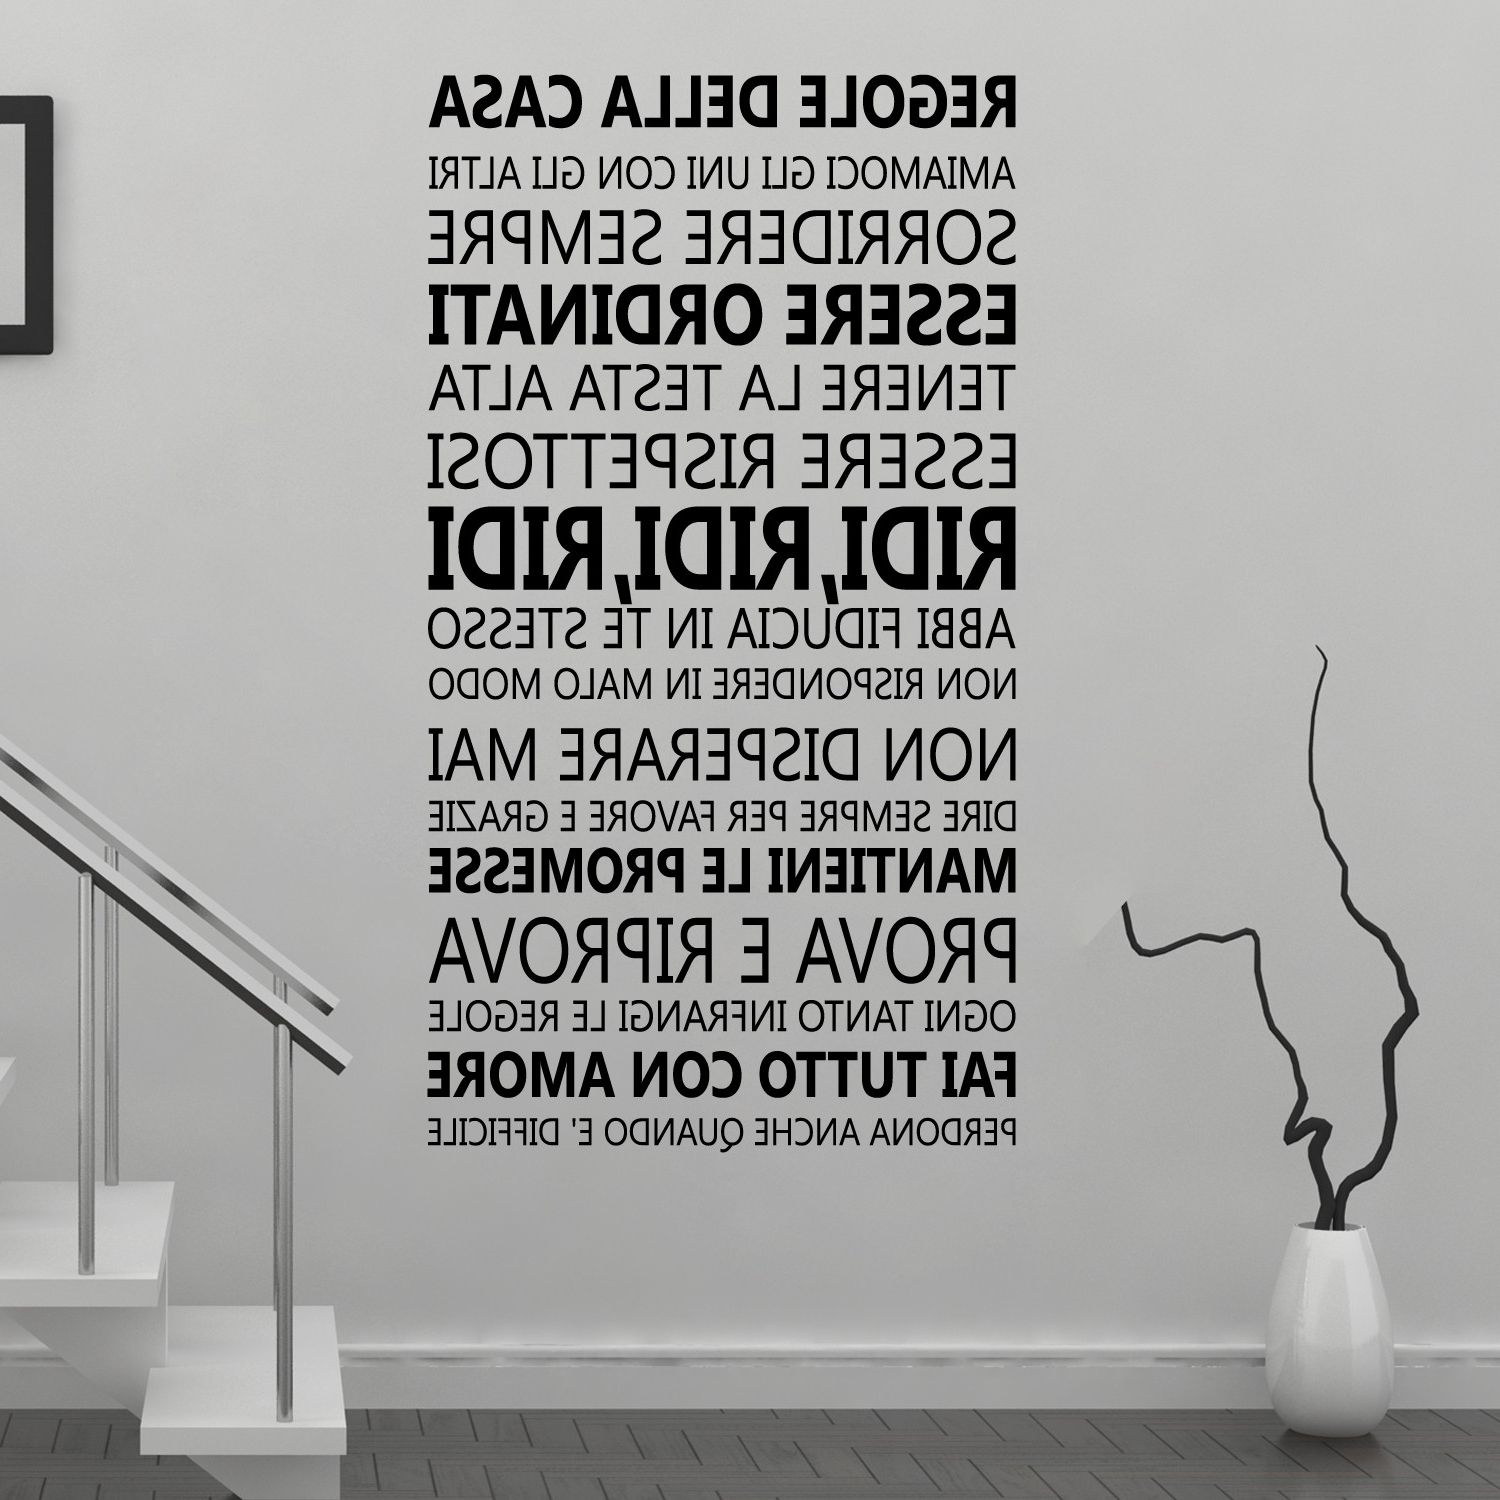 Wall Stickers Uk – Wall Art Stickers – Kitchen Wall Stickers Regarding Latest Italian Wall Art Quotes (View 1 of 15)